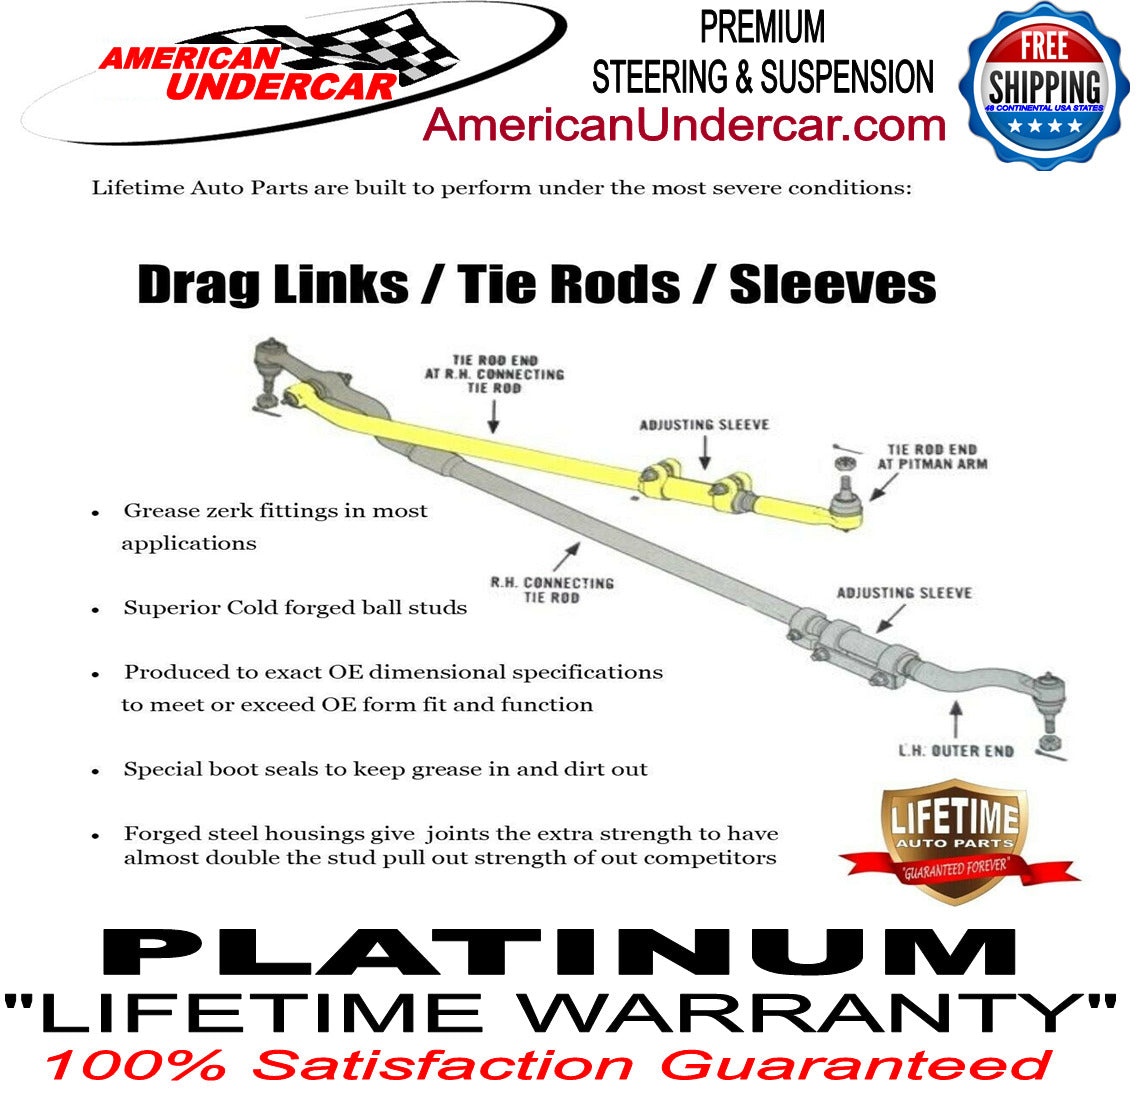 Lifetime Inner & Outer Tie Rod Steering Kit for 2009-2017 Chevrolet Traverse 2WD, AWD